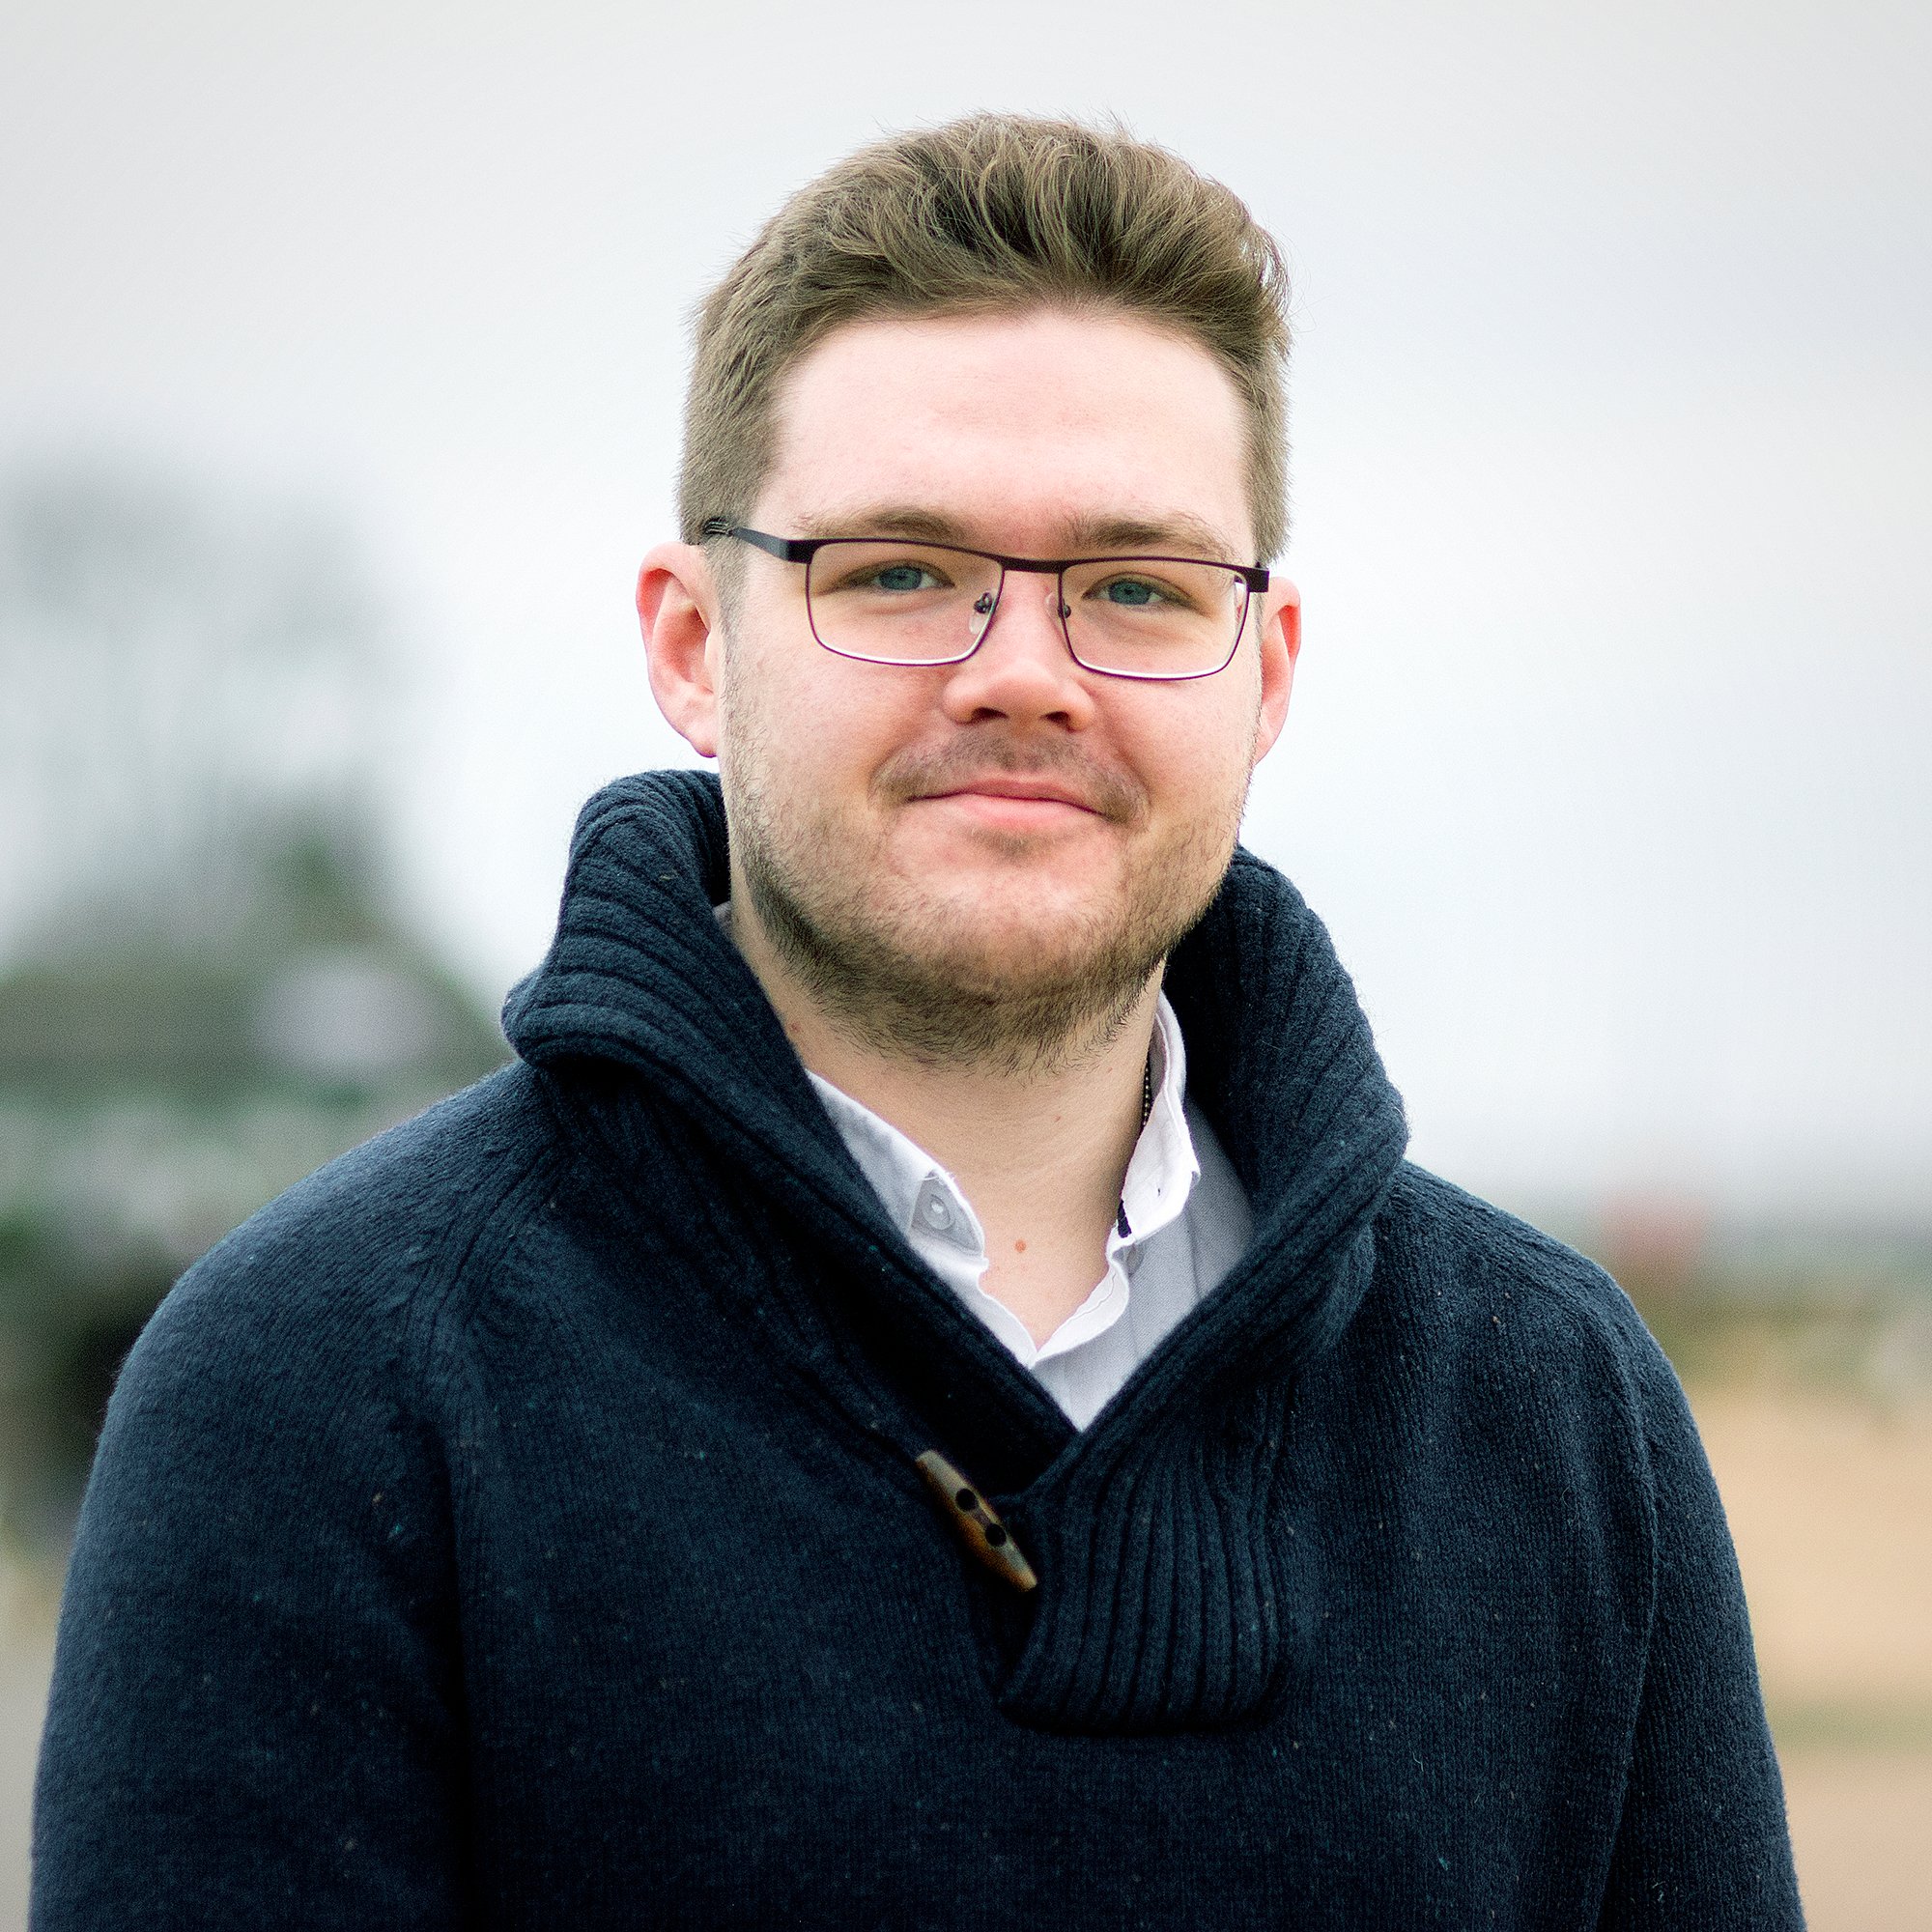 Nathaniel Love is the Green Party candidate for West Leigh